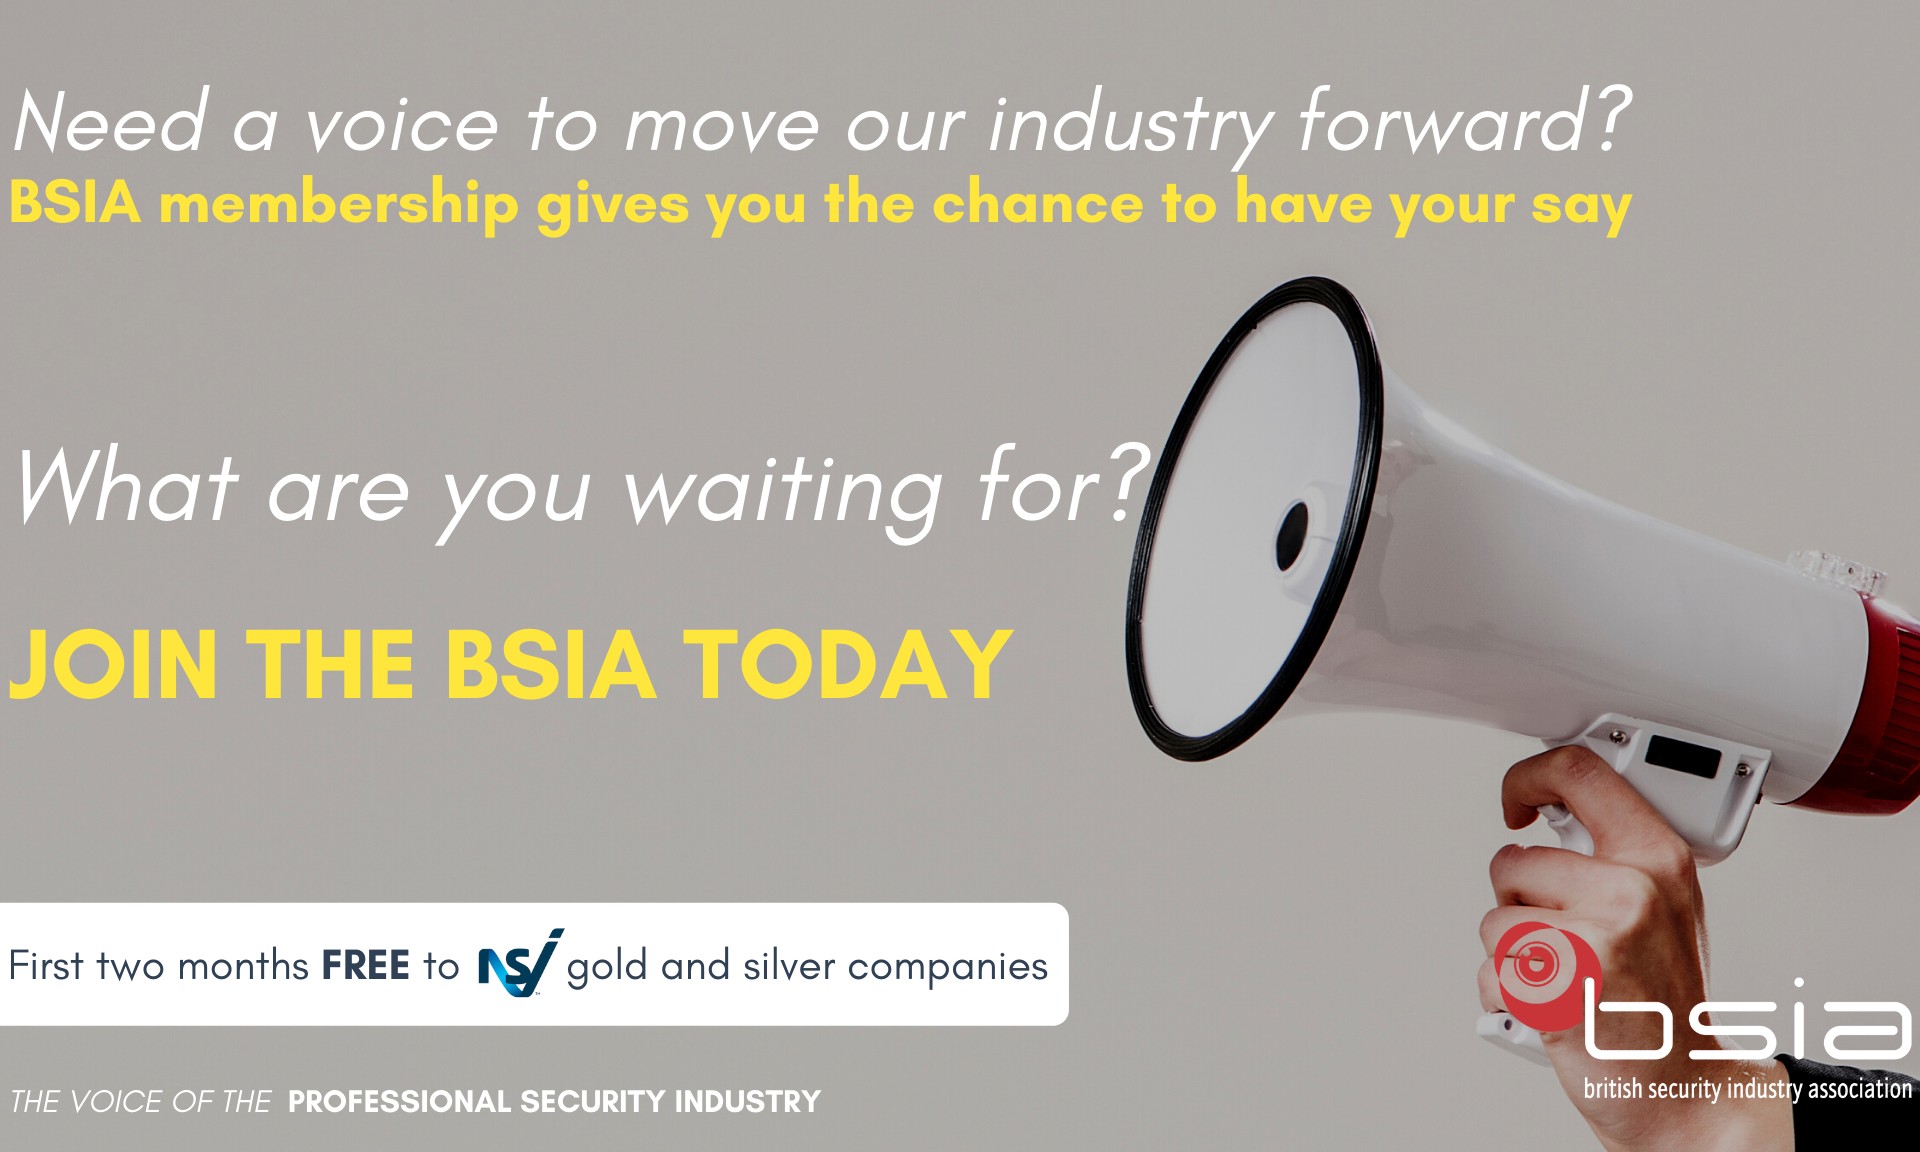 Exclusive membership offer launched to NSI gold and silver companies